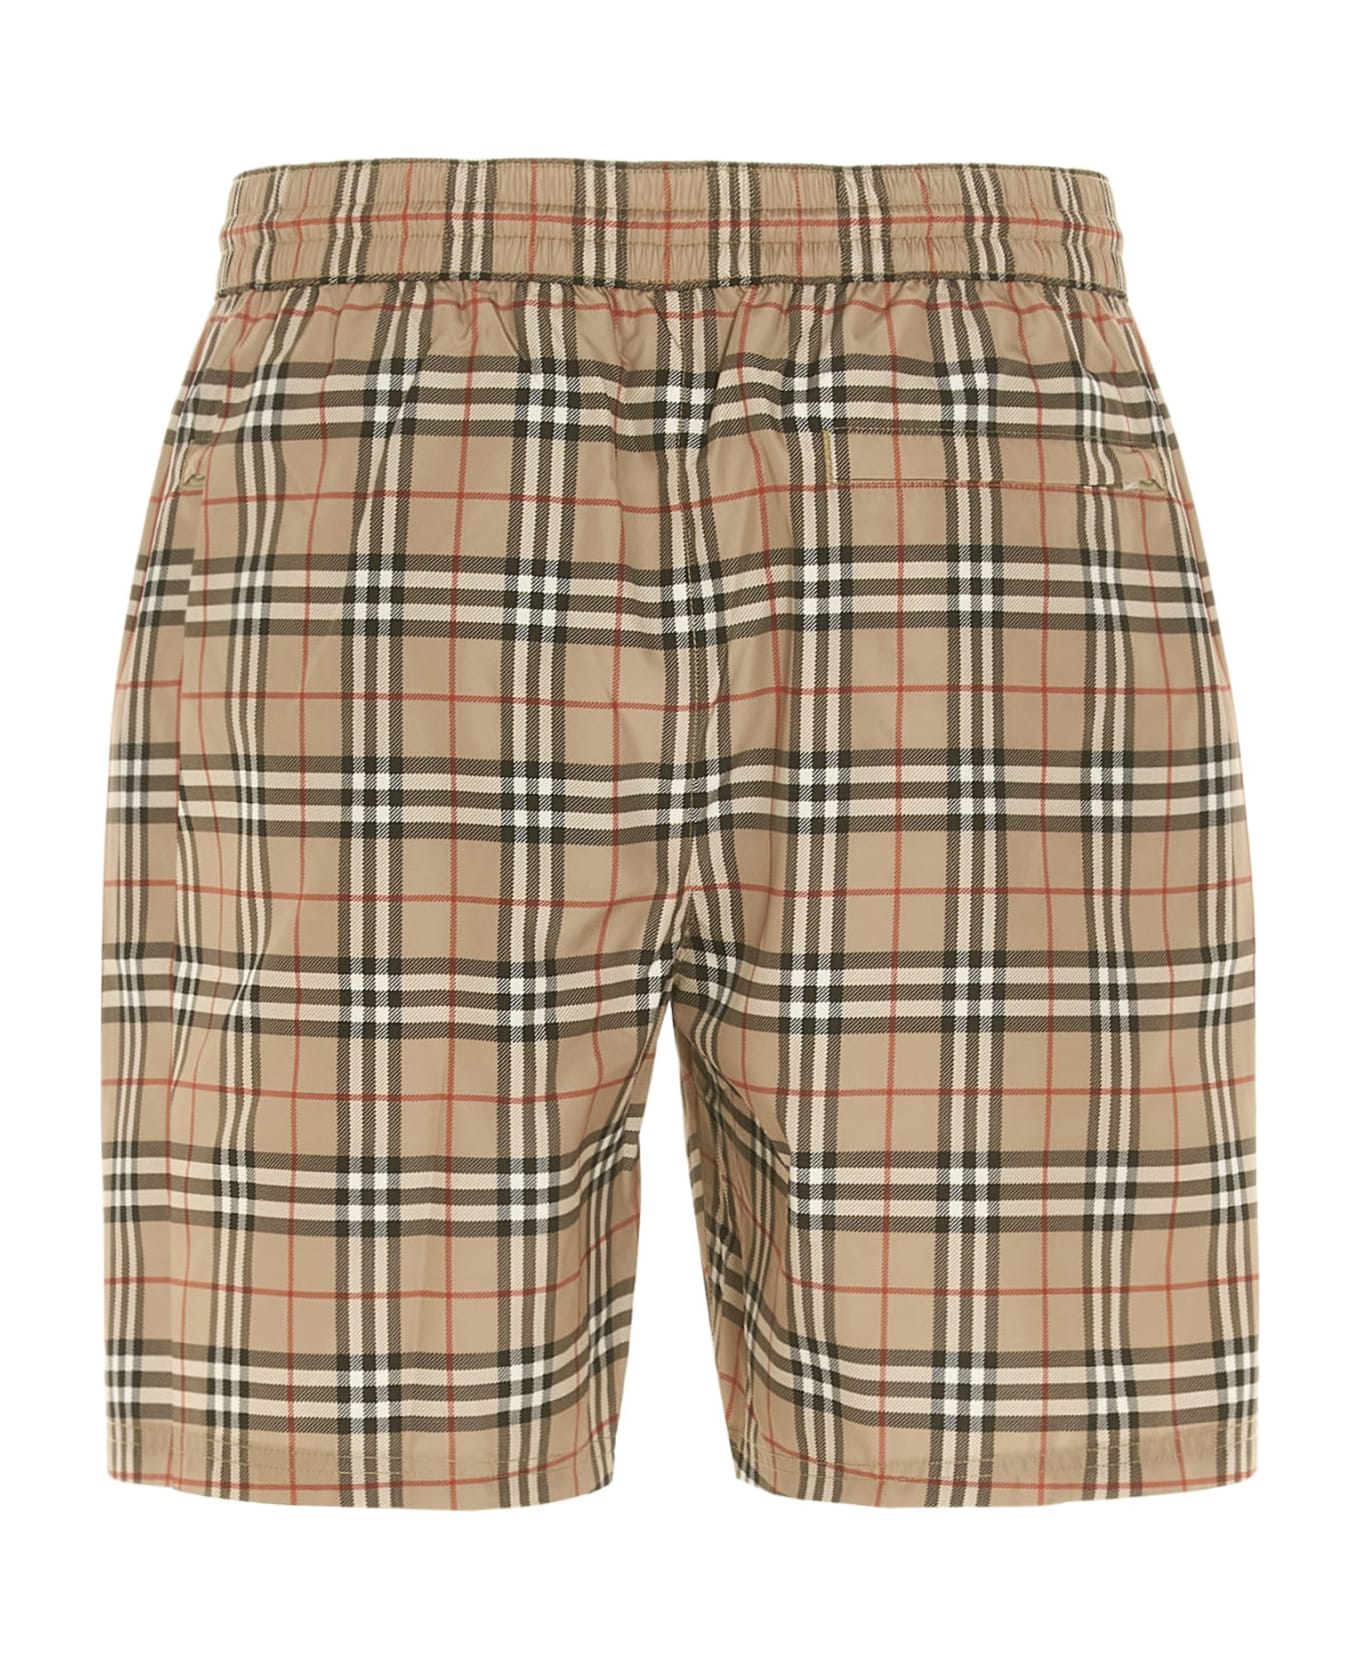 Burberry 'guildes' Swimming Trunks - Beige